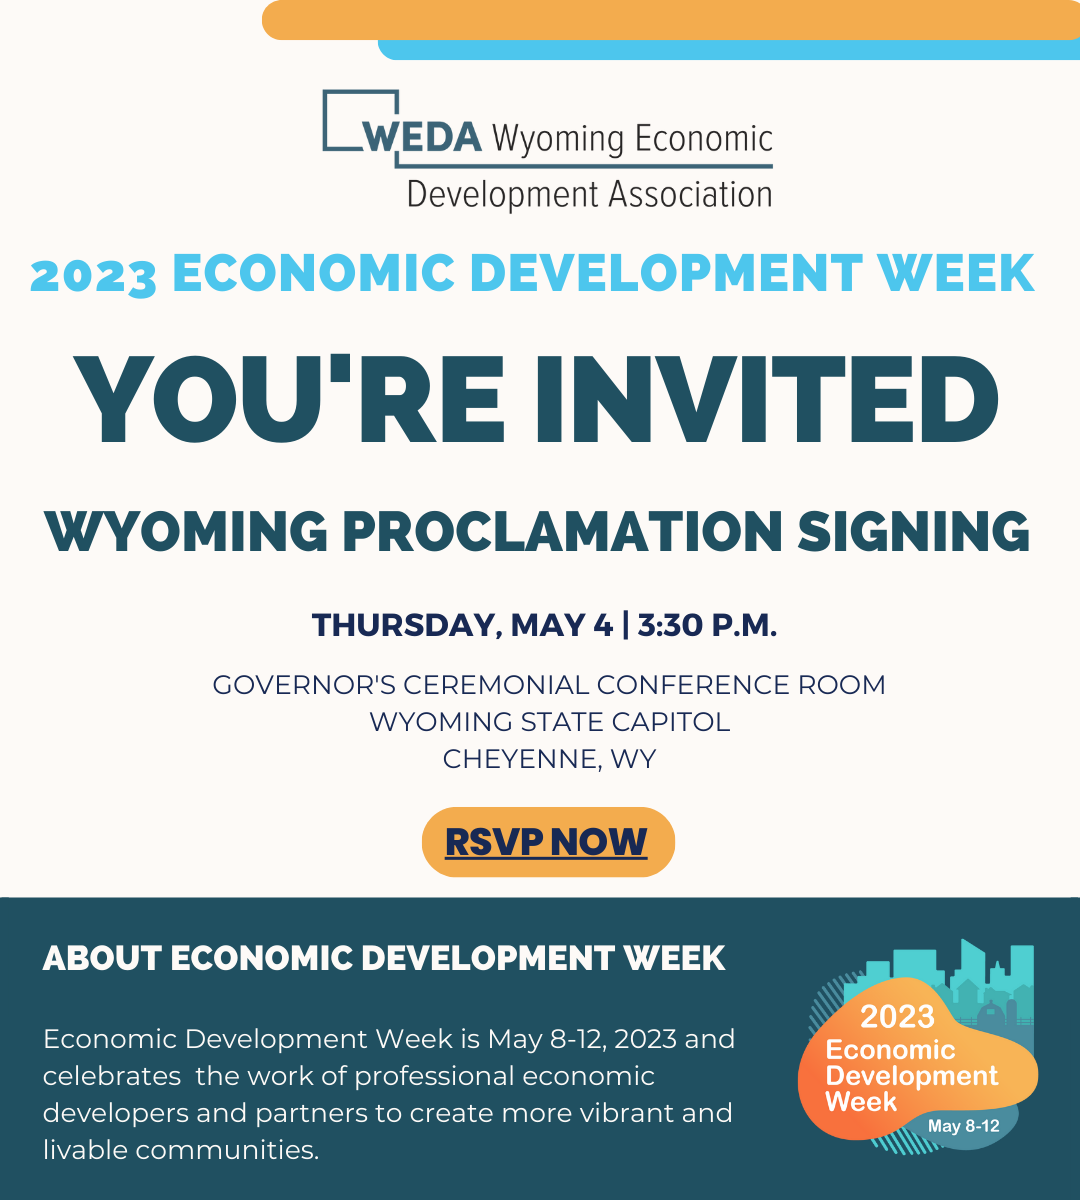 Event Promo Photo For WY Economic Development Week Proclamation Signing